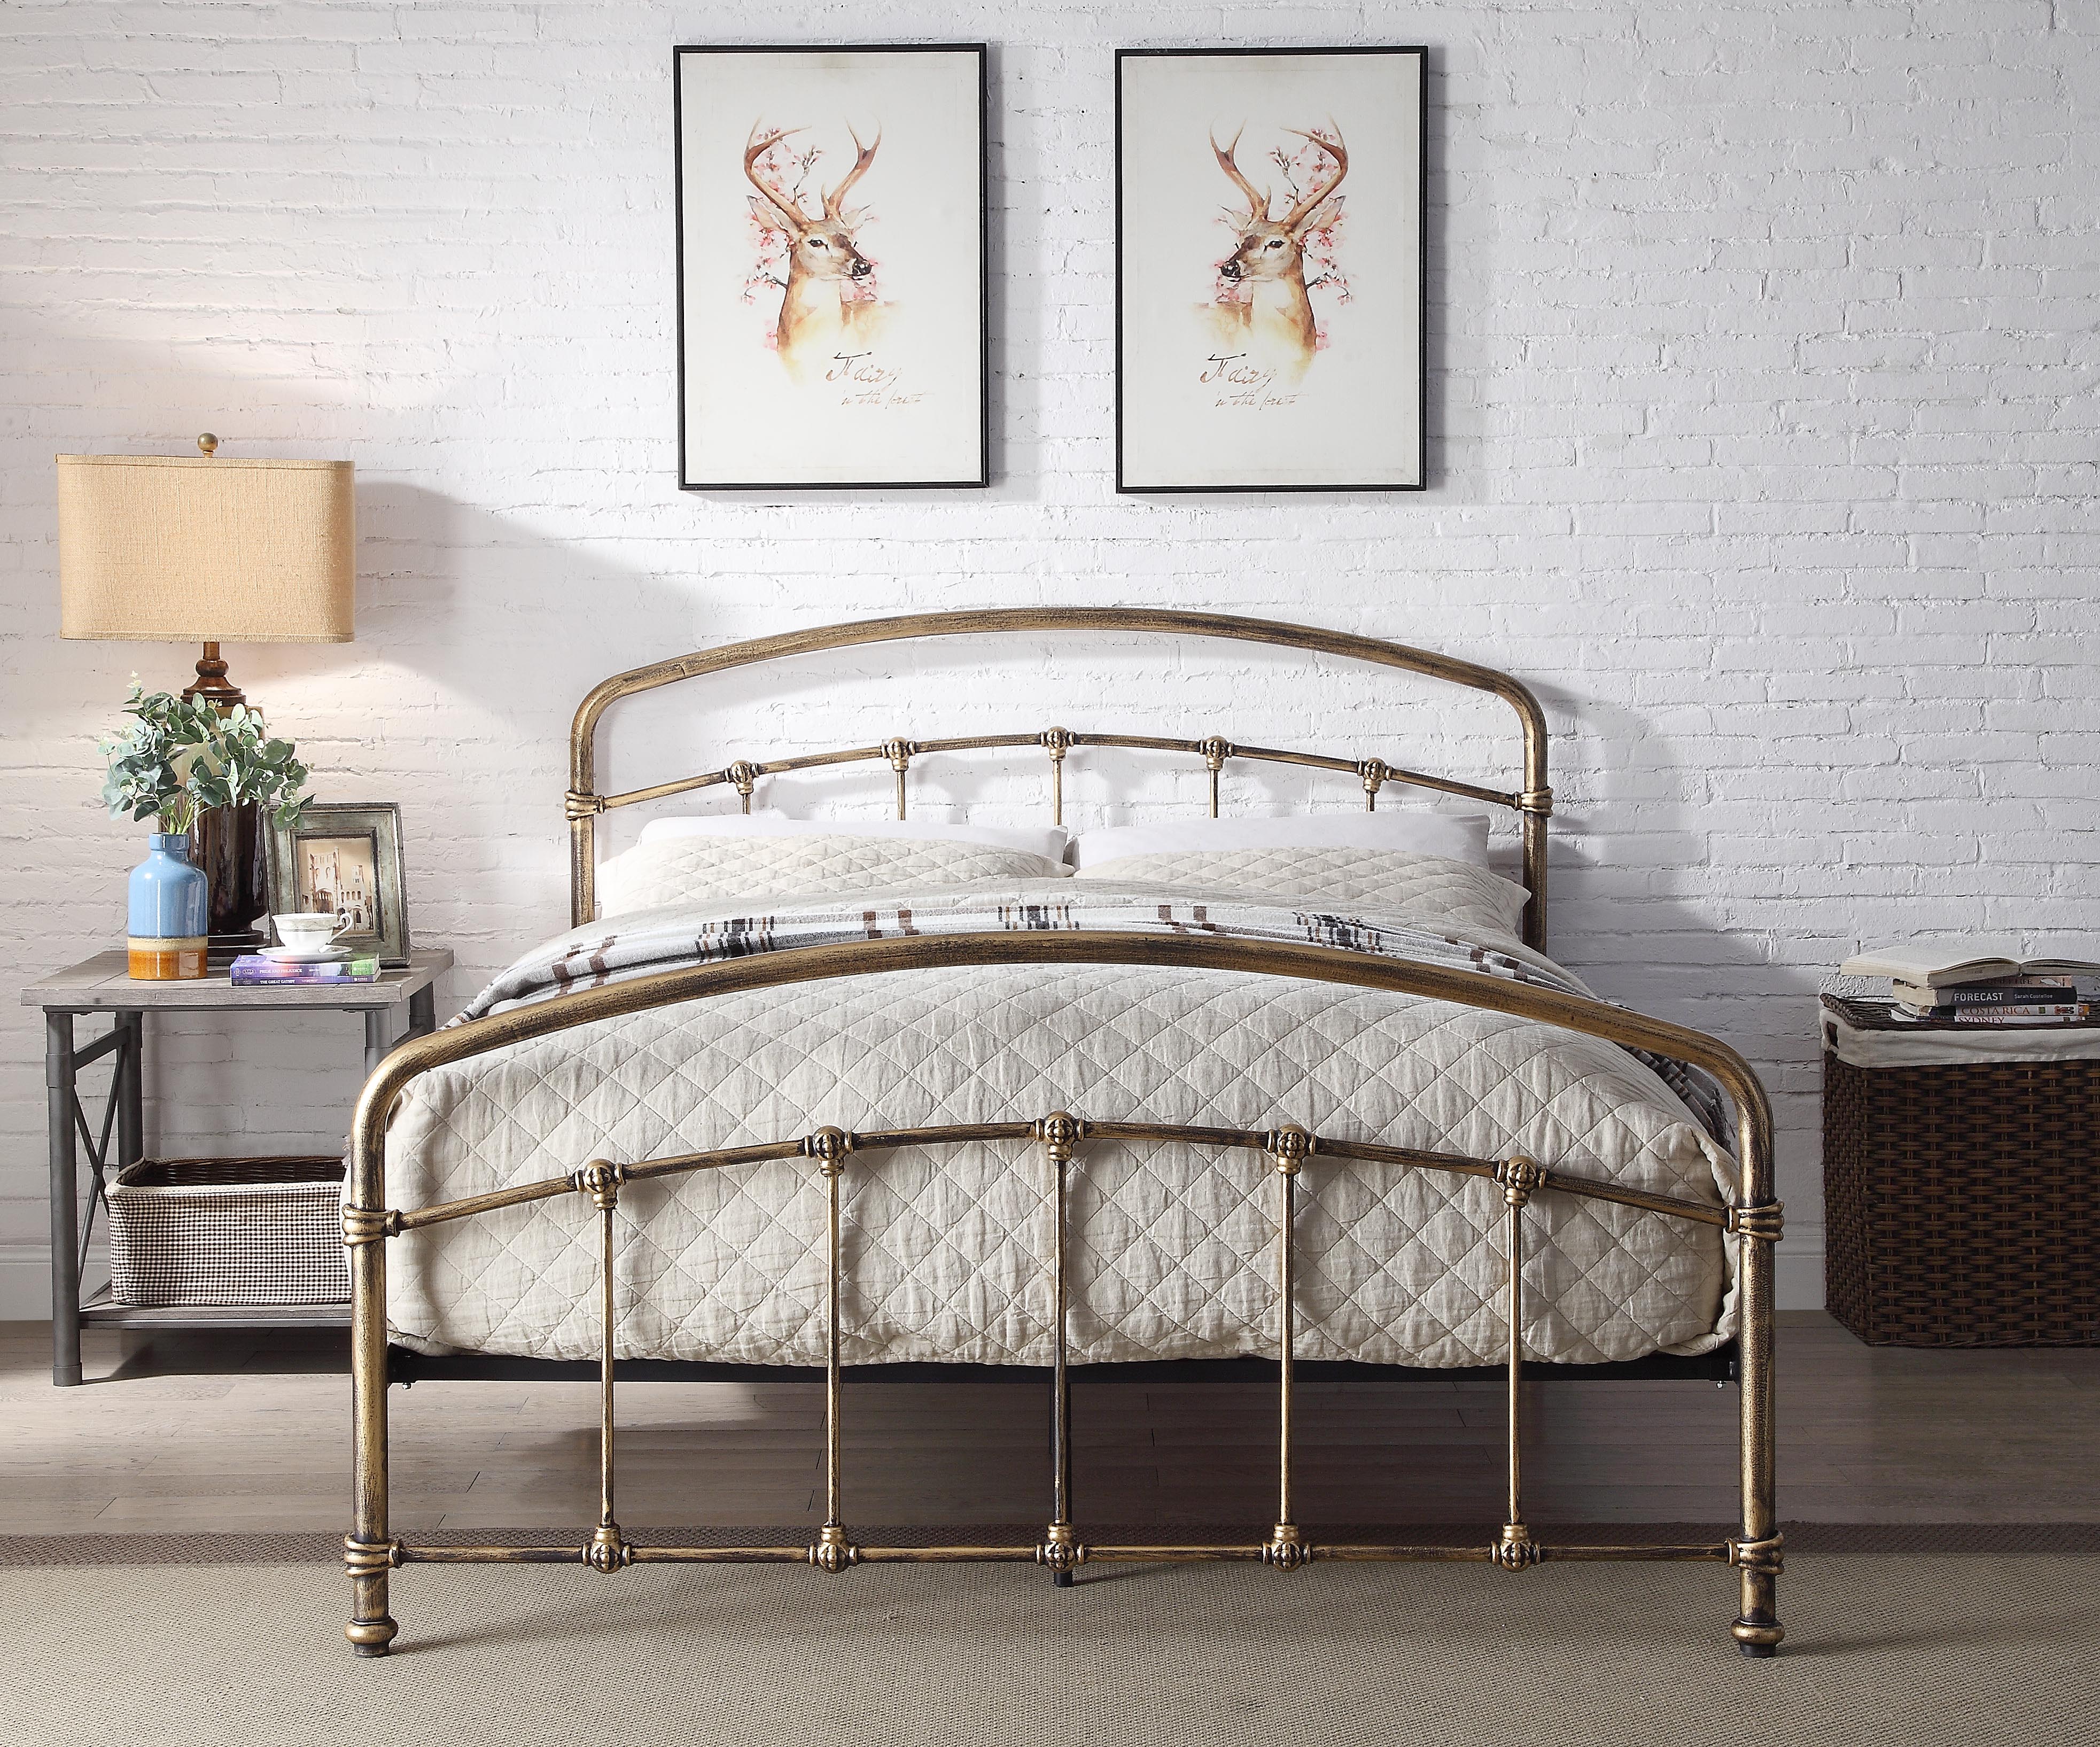 5ft King Size Retro Bed Frame Antique, Retro King Bed